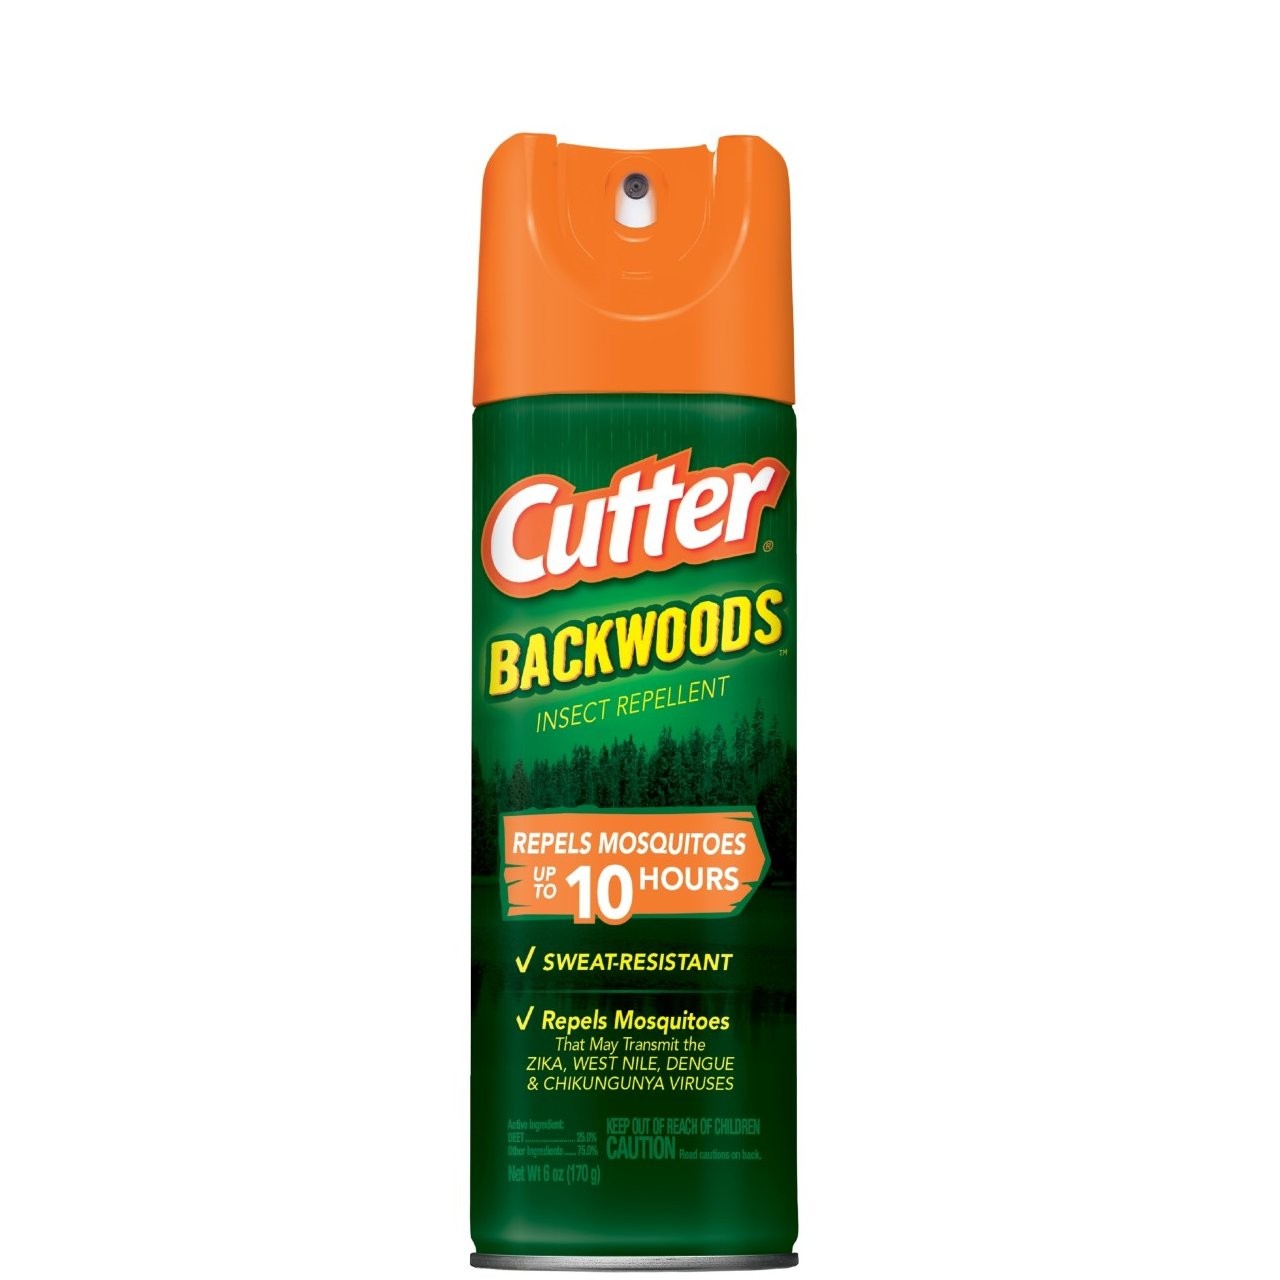 CUTTER INSECT REPELLENT BACKWOODS 6oz